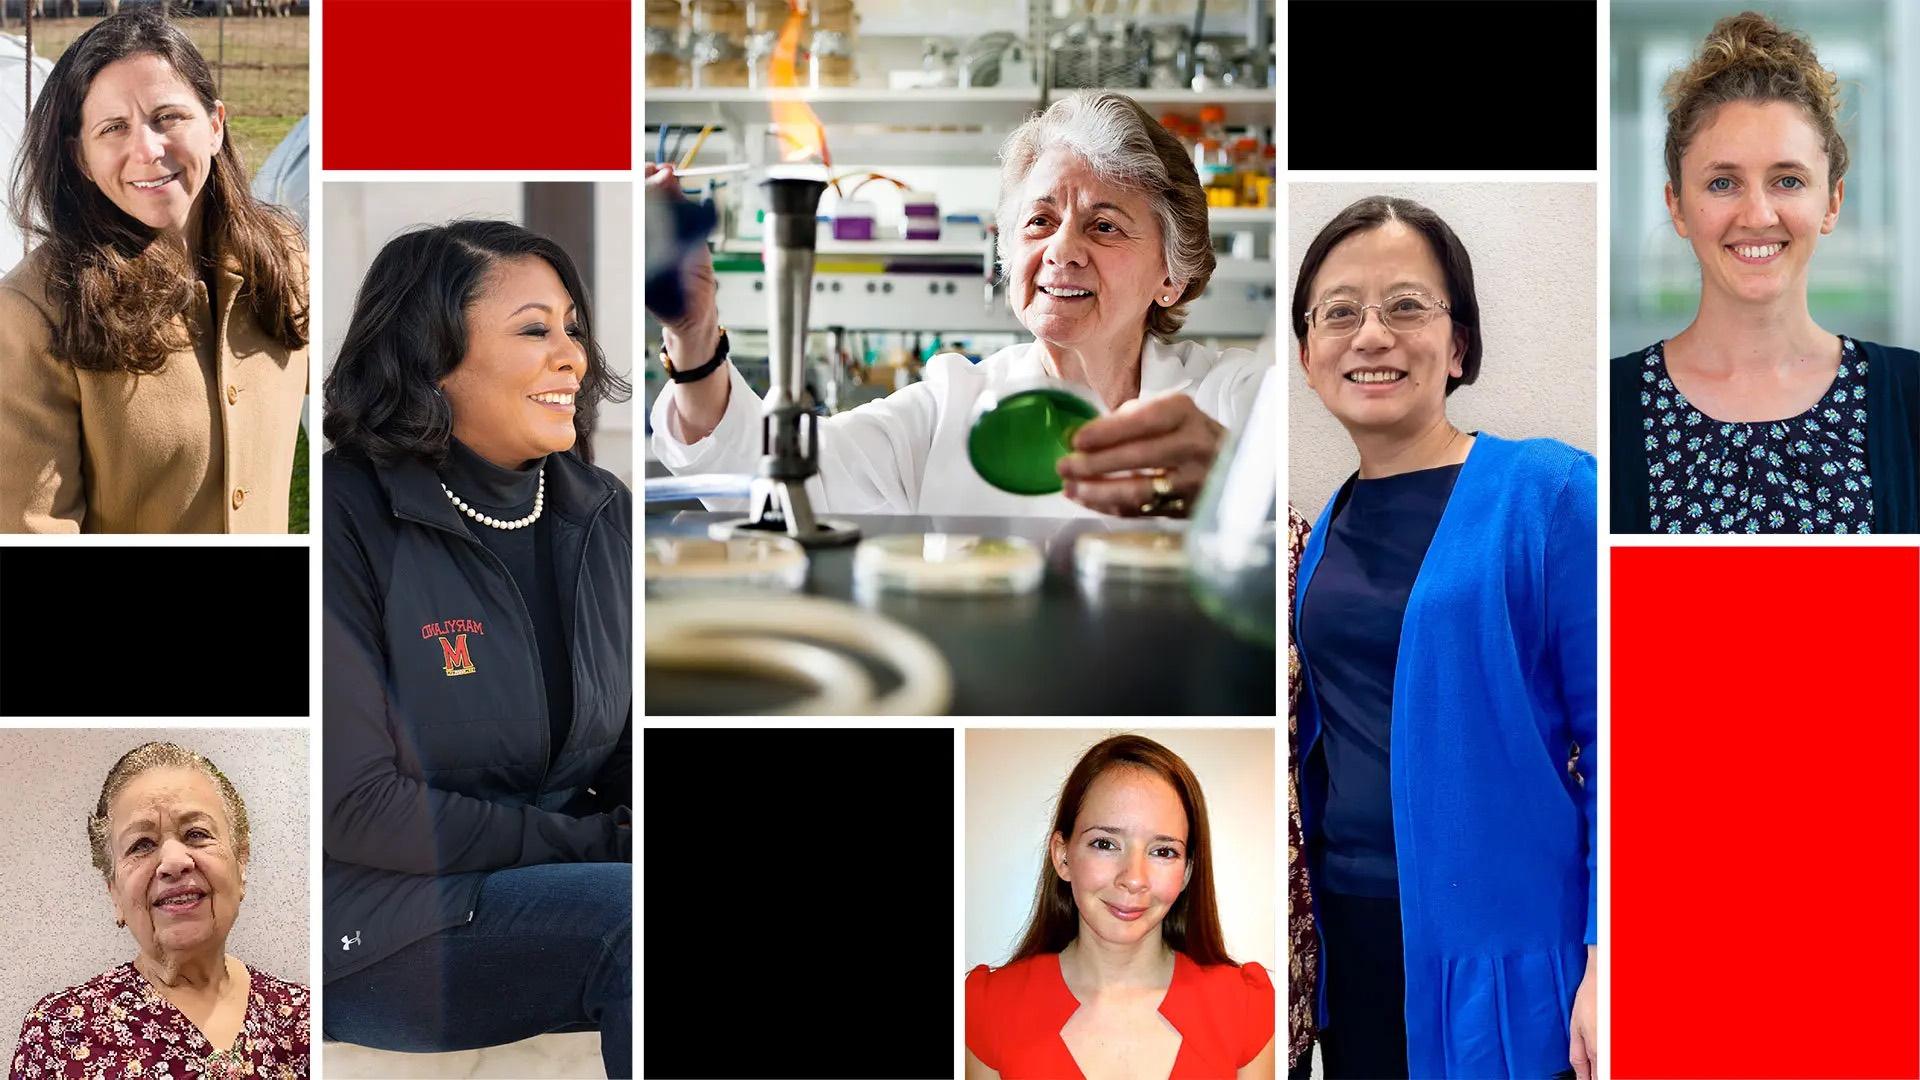 From left, Megan Newcombe, Min Wu, Rita Colwell, Jessica Vitak, Mia Smith-Bynum, Stephanie Lansing and Kawthar Zaki. All experienced moments of uncertainty in forging their careers in science, where women are a distinct minority, but found inspiration to continue.